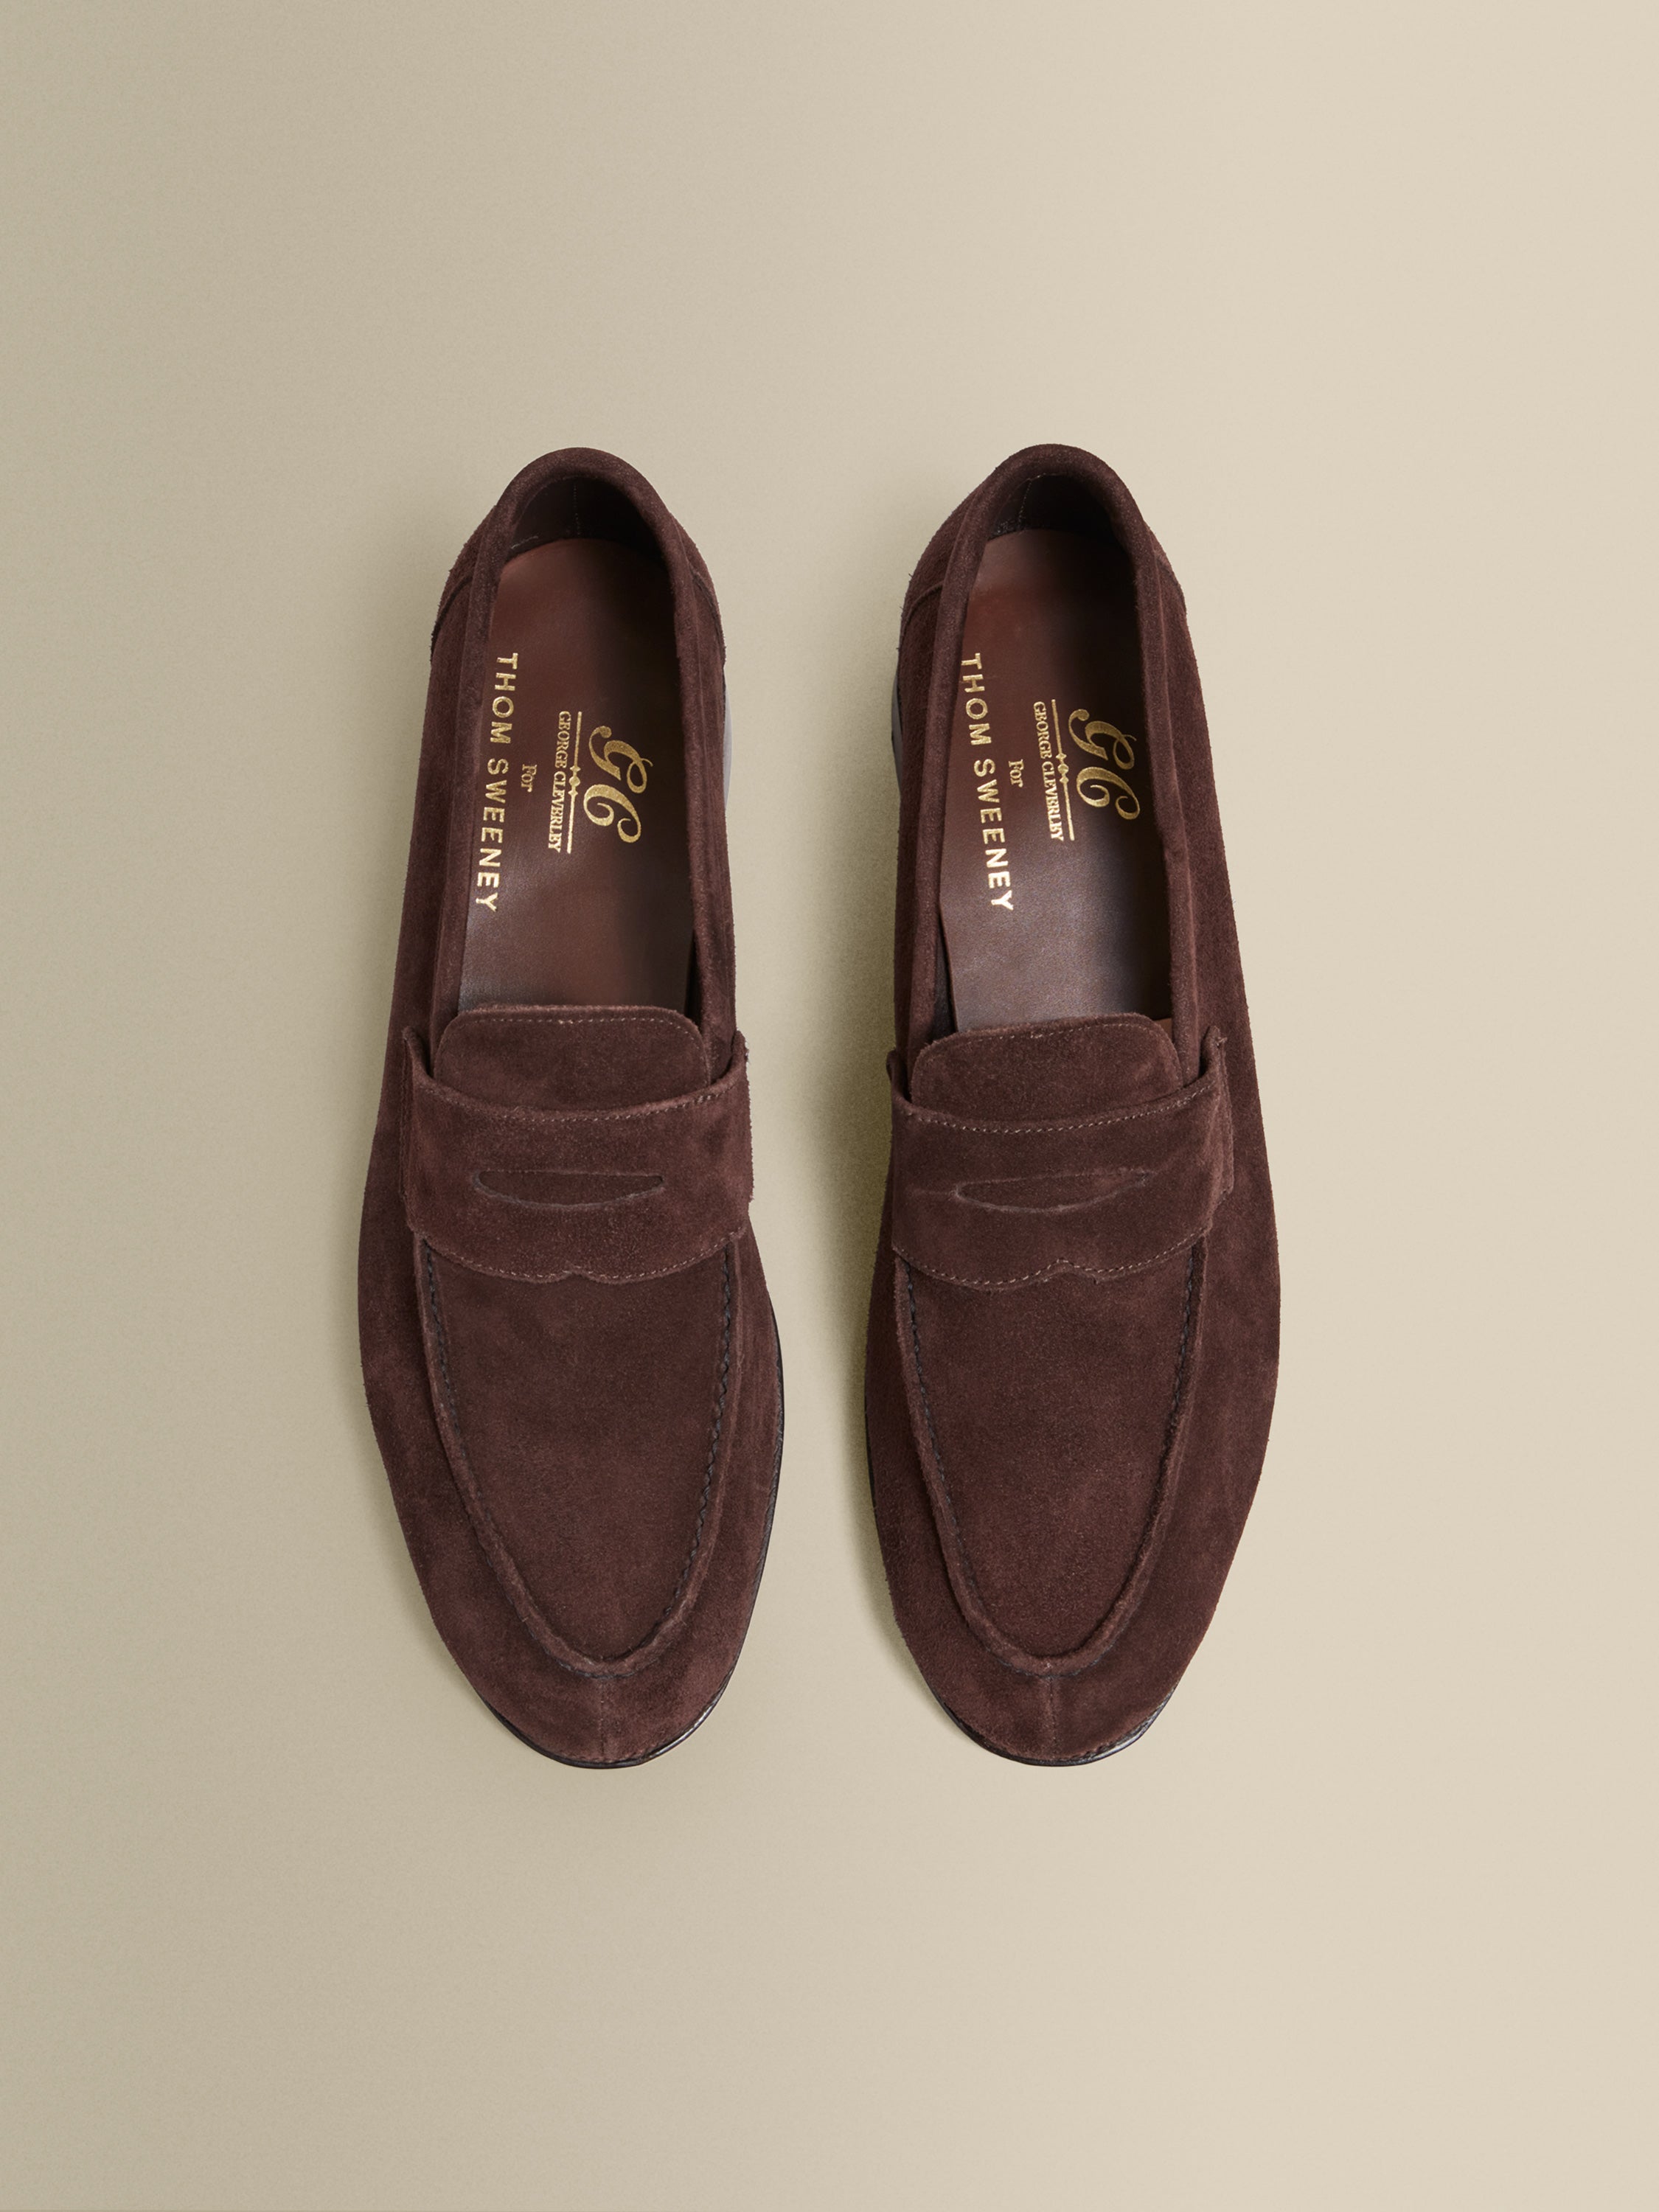 Suede Split Toe Loafer Shoes Coffee Product Image Sole